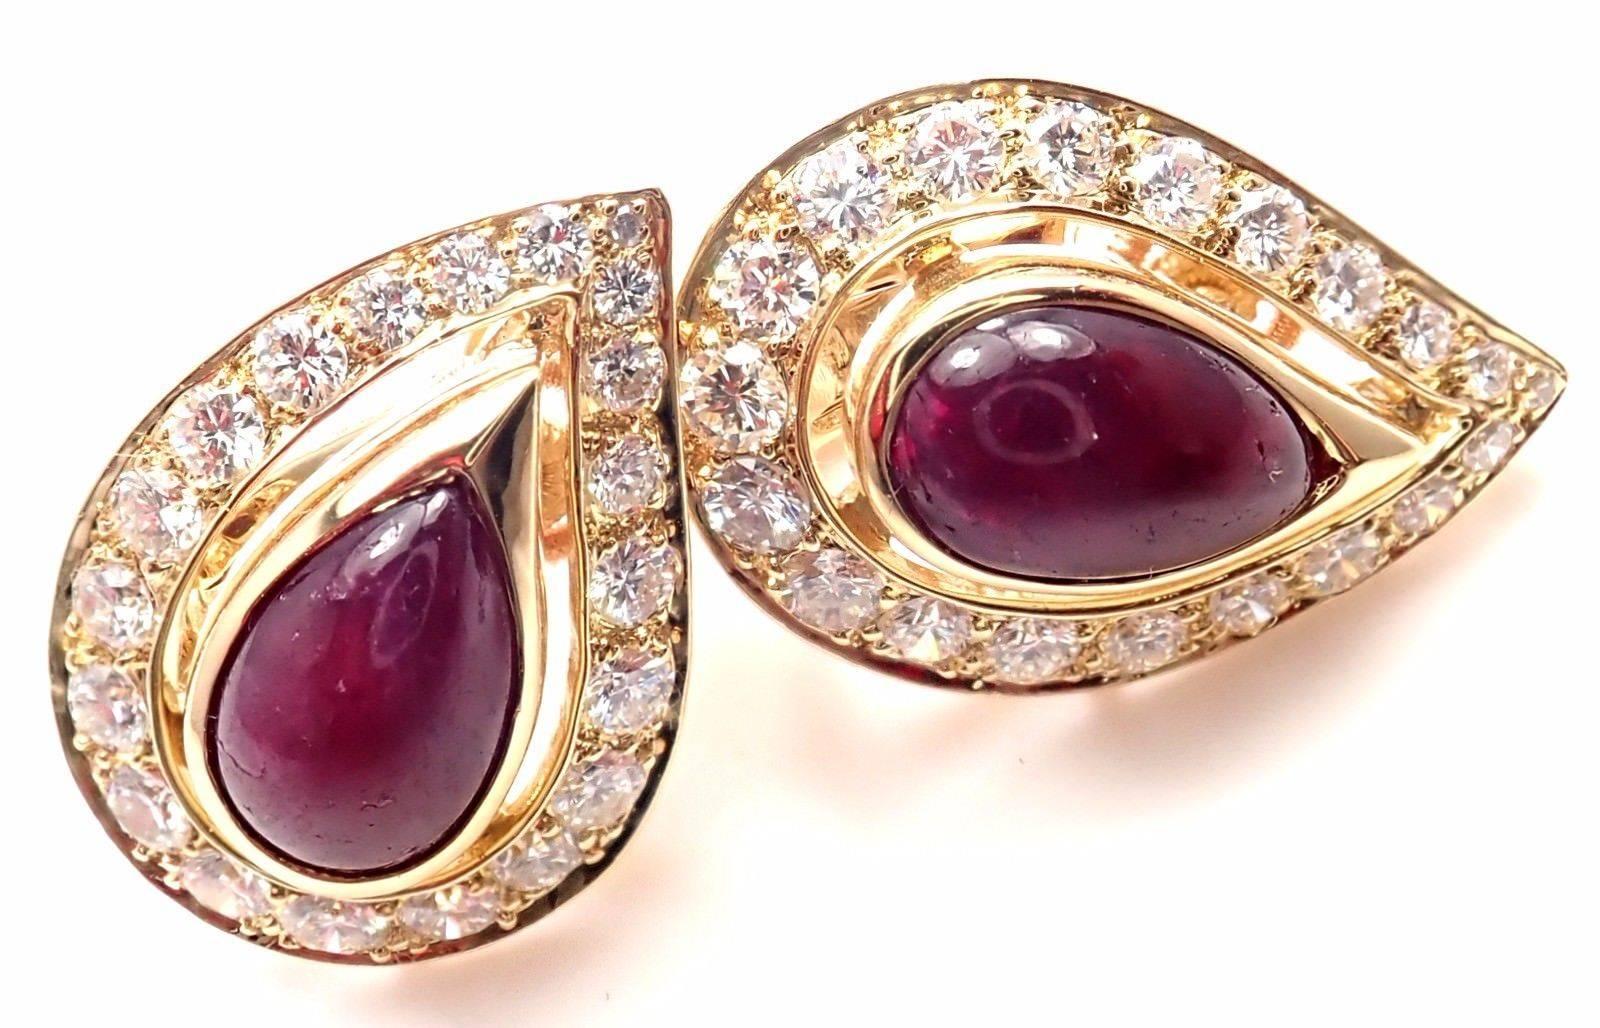 18k Yellow Gold Diamond And Ruby Vintage Earrings by Cartier. 
With 20 round brilliant cut diamonds VVS1 clarity, E color total weight approx. 1ct
2 pear shape cabochon rubies 10mm x 7mm each
***These earrings are made for pierced ears.***
Details: